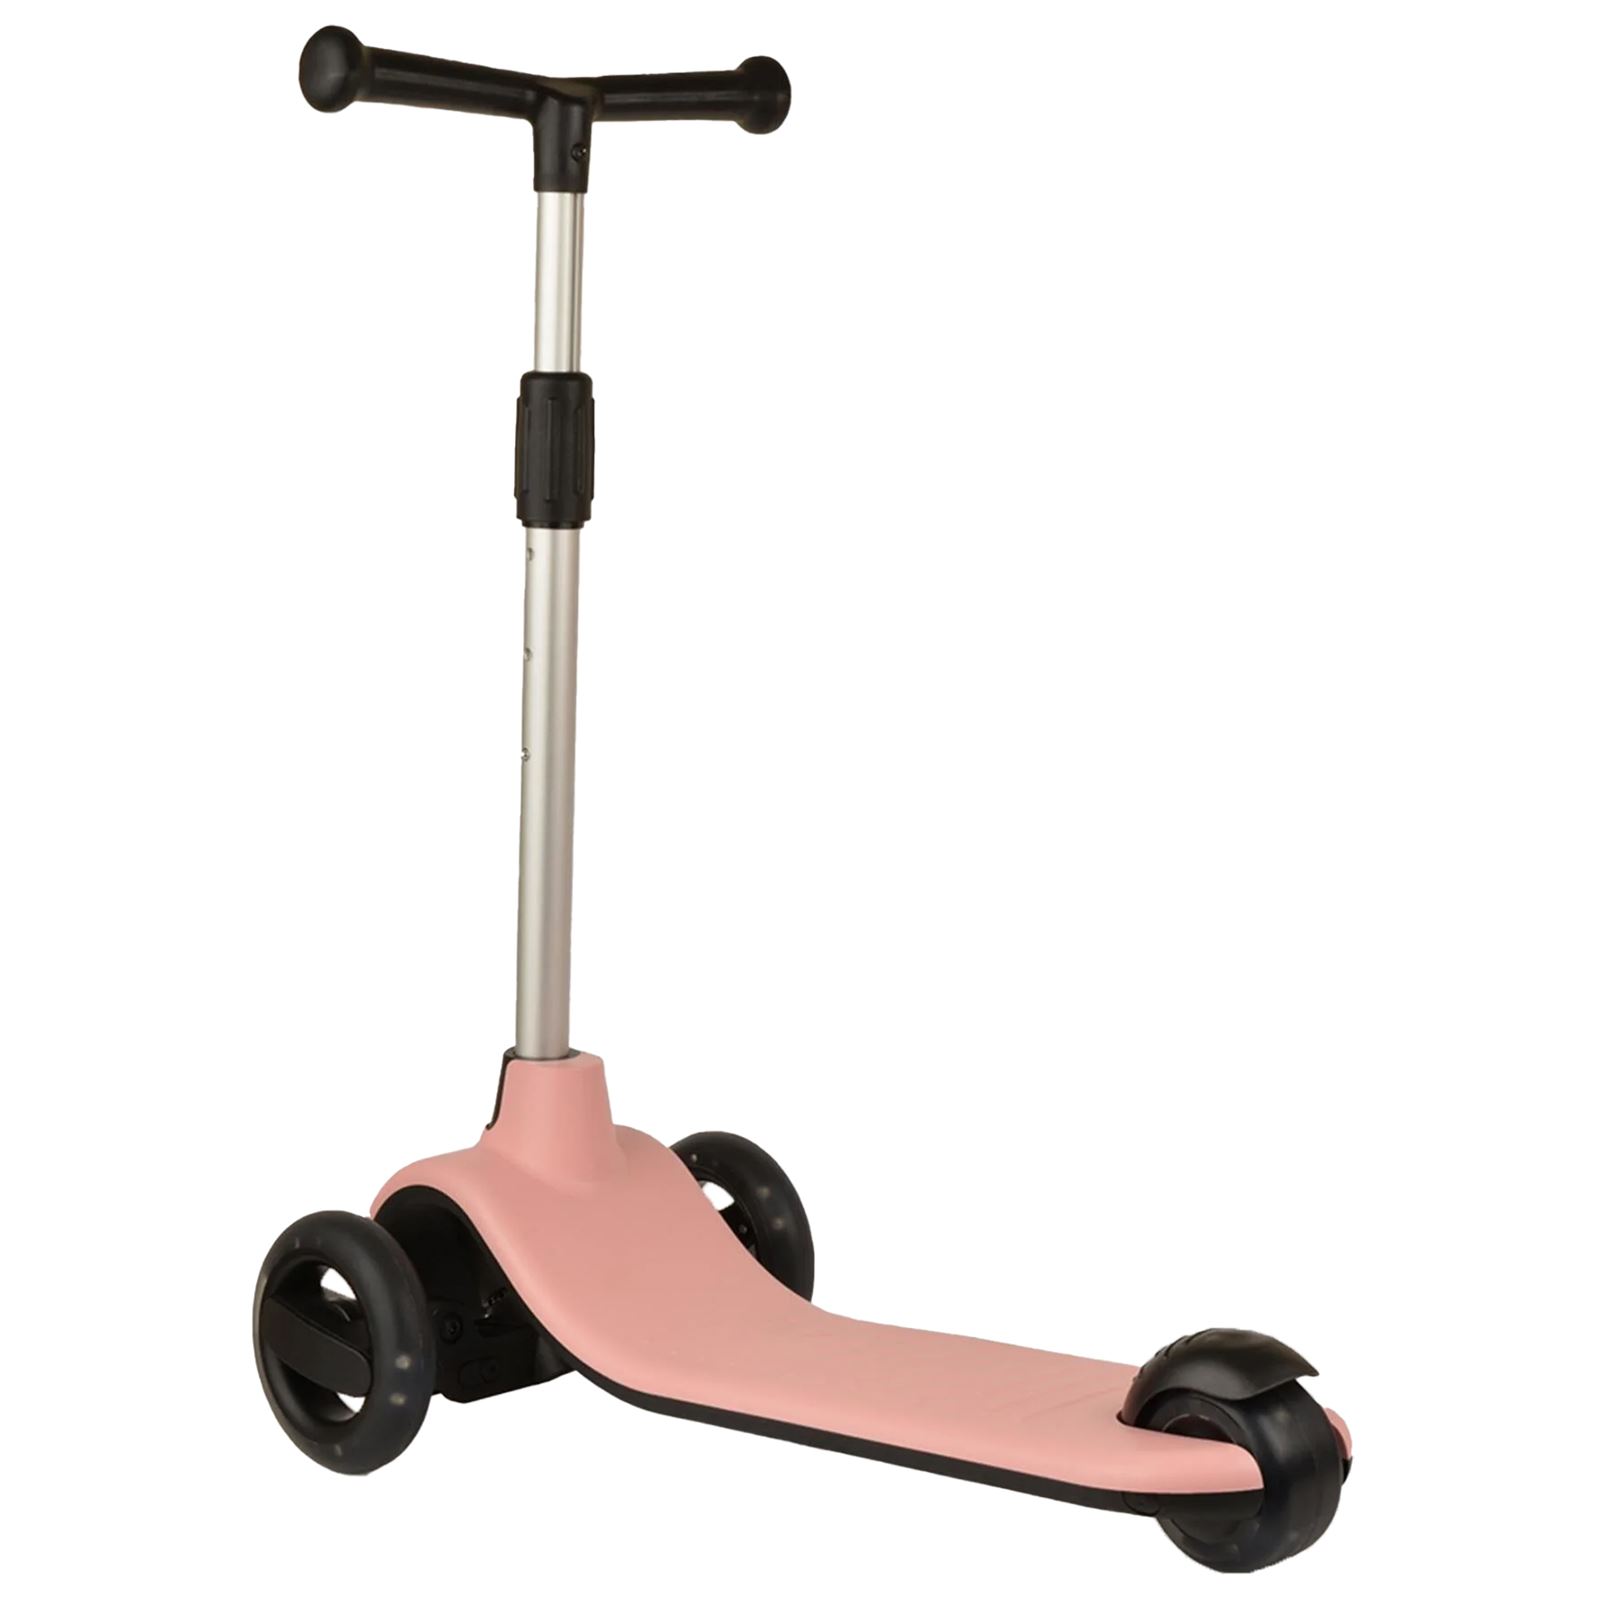 Let's Be Child Let's Ride Scooter Pembe